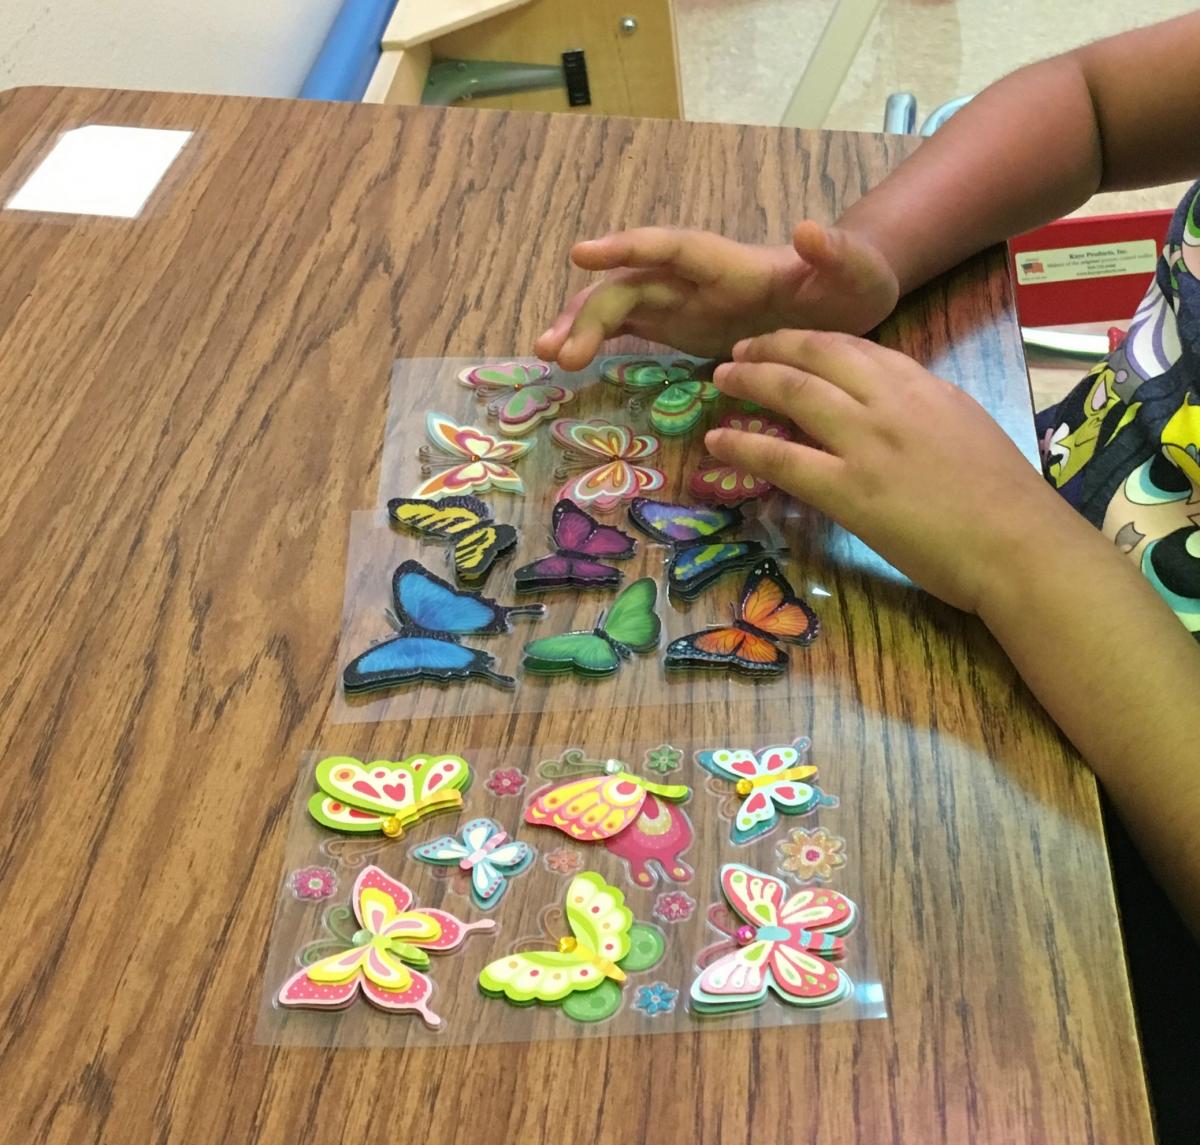 student's hands exploring the butterfly stickers